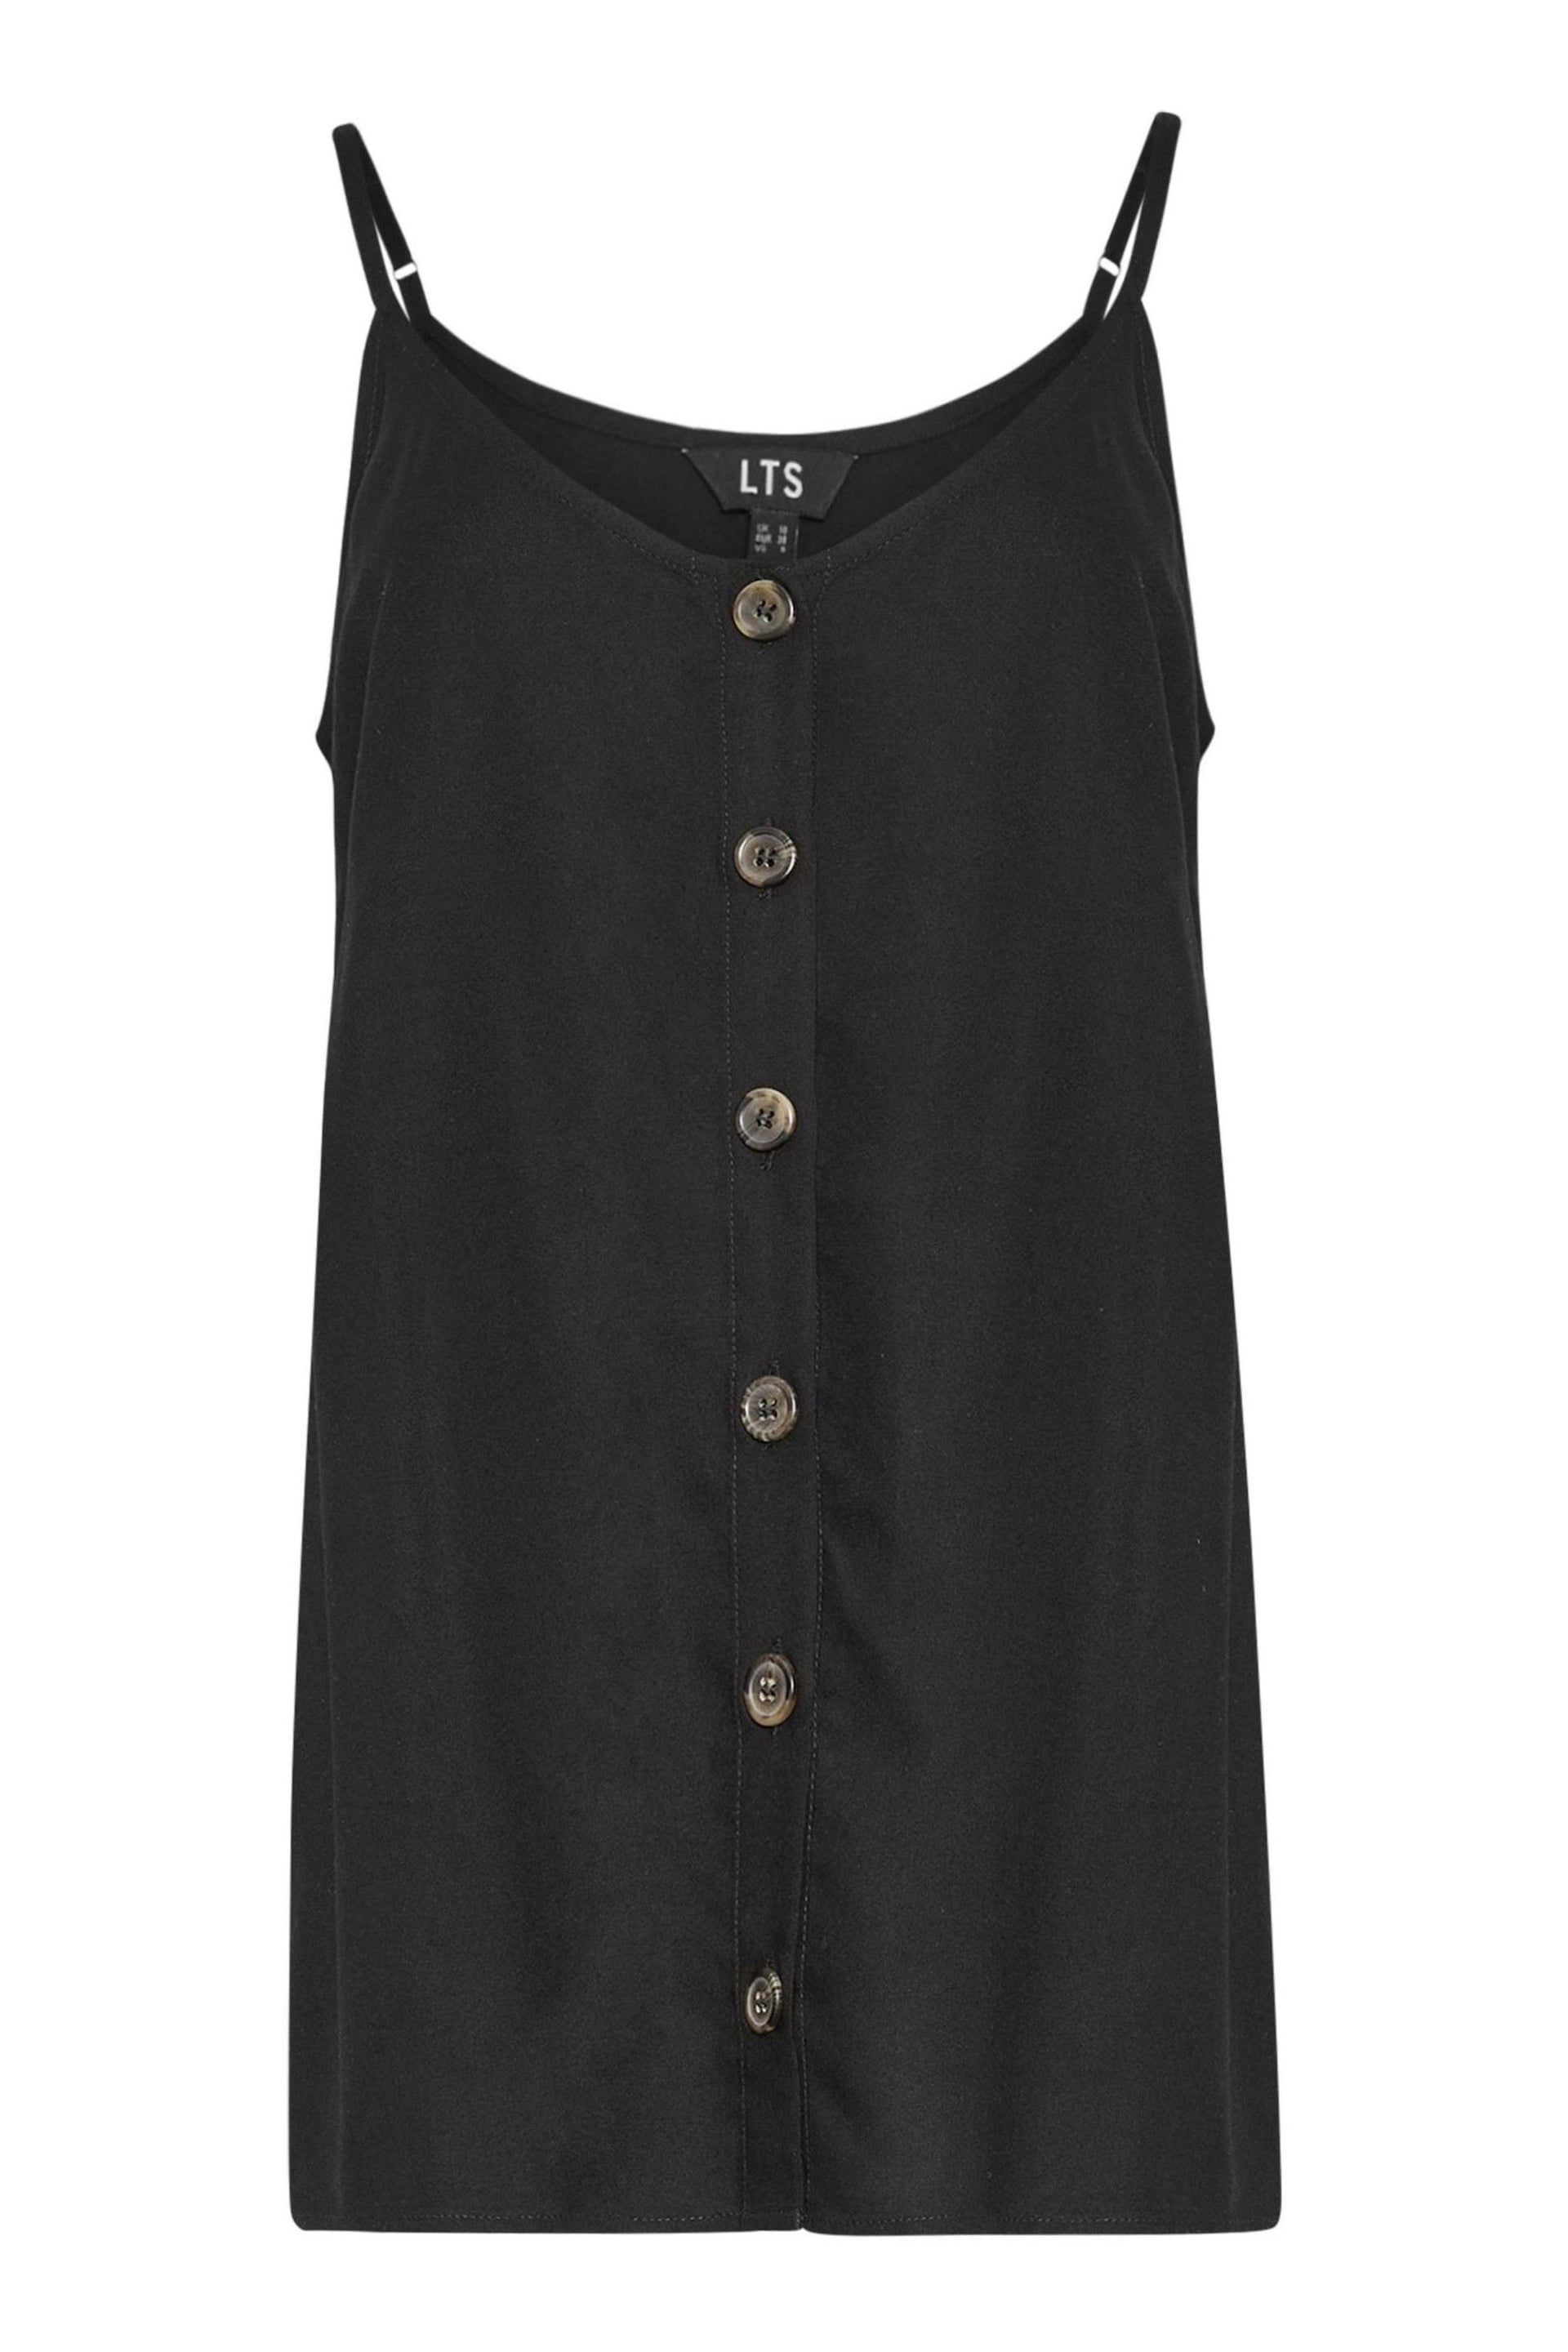 Long Tall Sally Black Button Through Cami Vest Top - Image 5 of 5